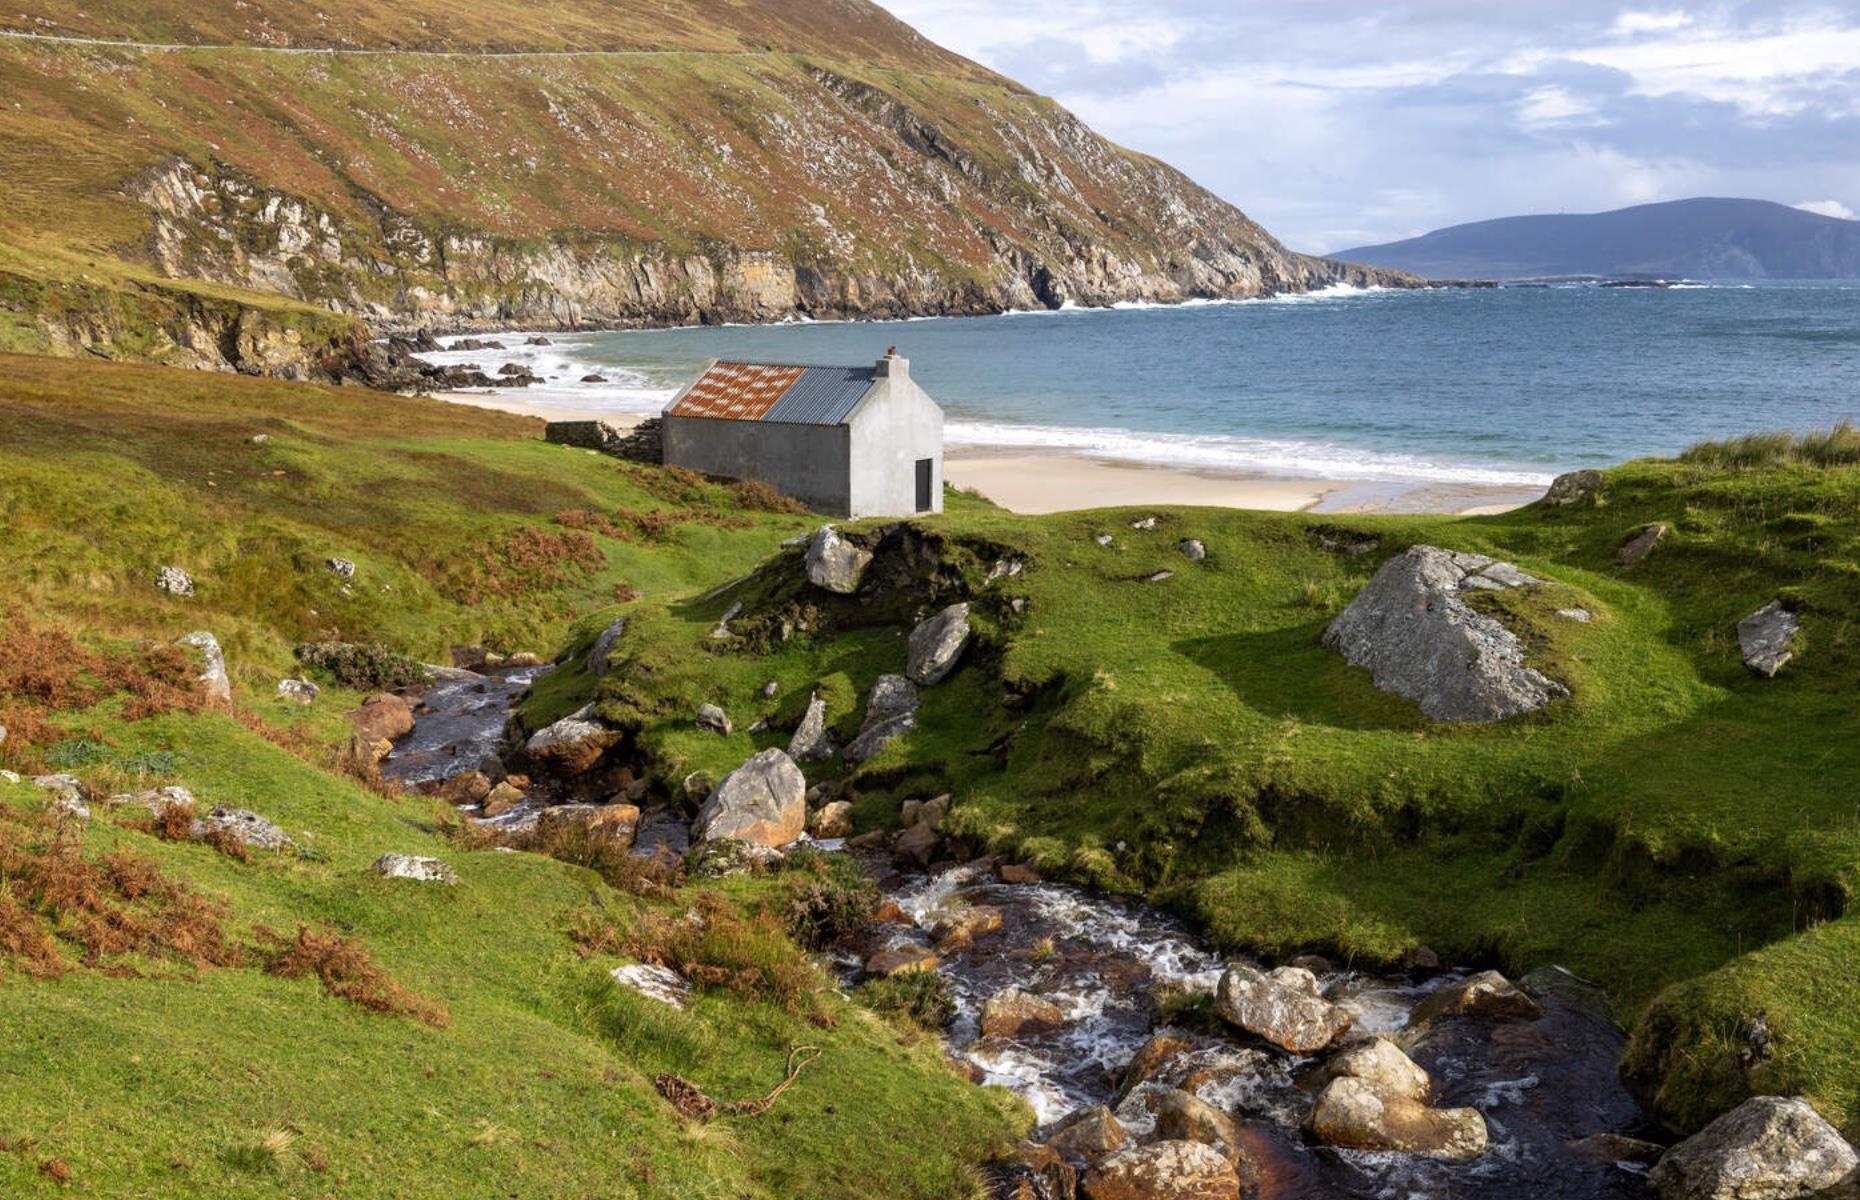 <p>It’s not hard to see why author Graham Greene visited Achill, the largest island off the west coast of Ireland, writing parts of <em>The Heart of the Matter</em> and <em>The Fallen Idol </em>in the village of Dooagh, near remote Keem Bay. This magical mix of peat bogs, mossy mountains and craggy coves offers a windswept coastal beauty that Ireland excels in. Step back in time to explore the deserted village of Slievemore, abandoned during the 19th-century famine when starving families relocated.</p>  <p><a href="https://www.loveexploring.com/galleries/101630/the-worlds-most-eerie-abandoned-towns-and-cities?page=1"><strong>Discover more of the world's most eerie abandoned towns and cities</strong></a></p>